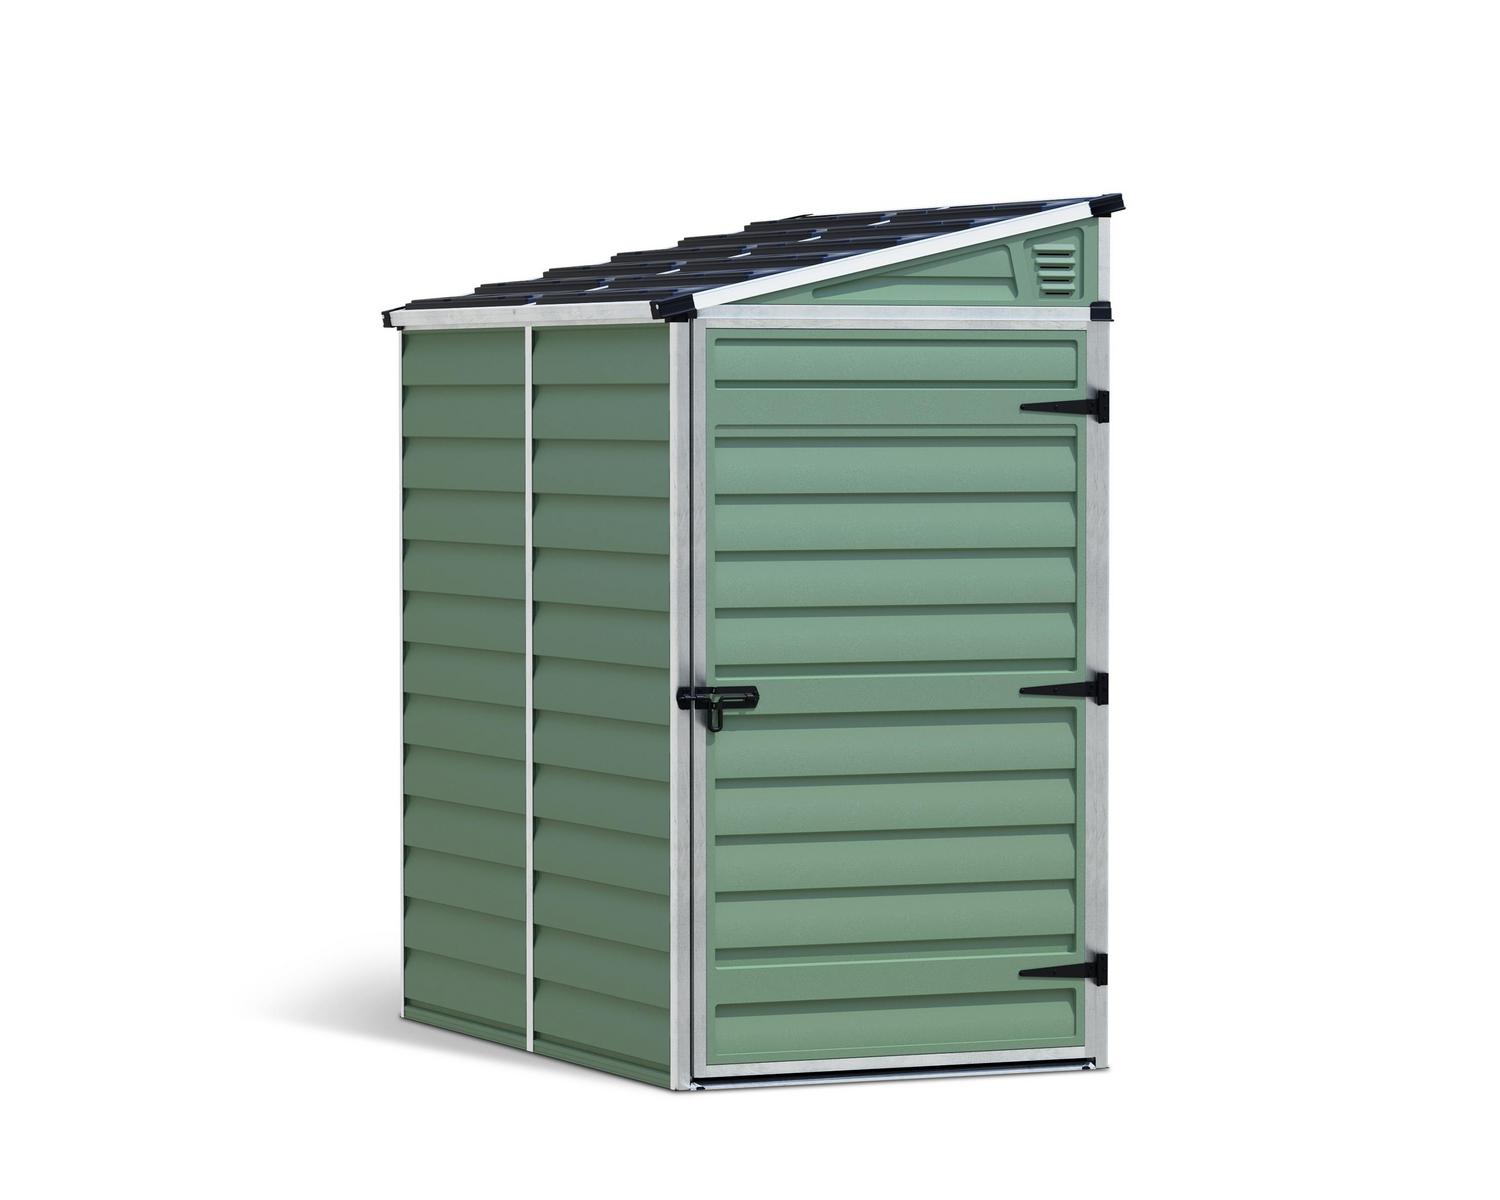 Pent 4 ft. x 6 ft. Plastic Storage Shed with Green Polycarbonate Panels &amp; Aluminium Frame